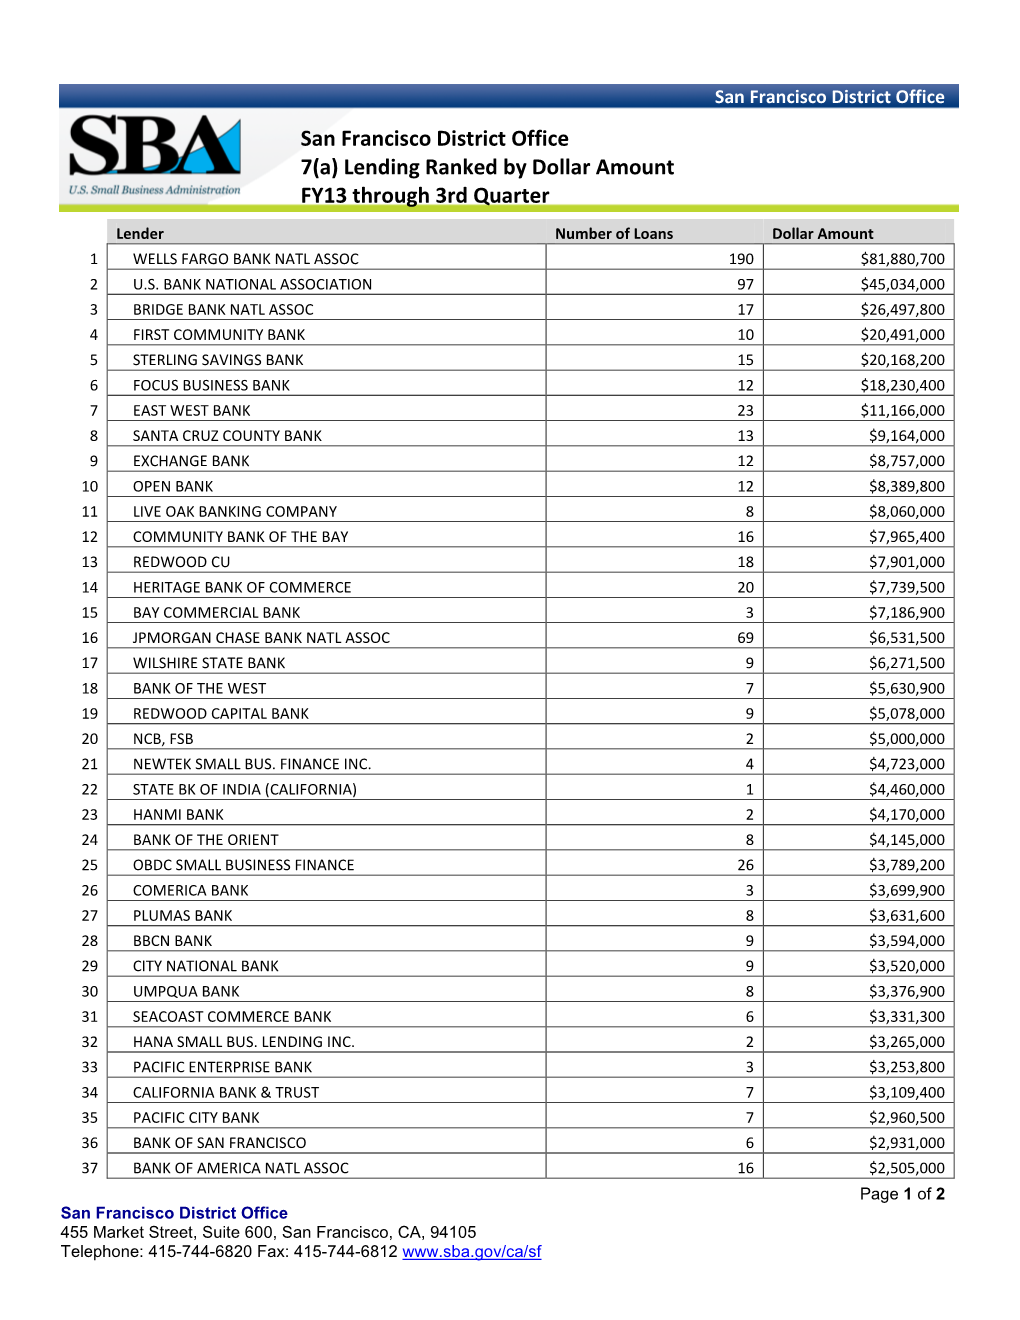 San Francisco District Office 7(A) Lending Ranked by Dollar Amount FY13 Through 3Rd Quarter